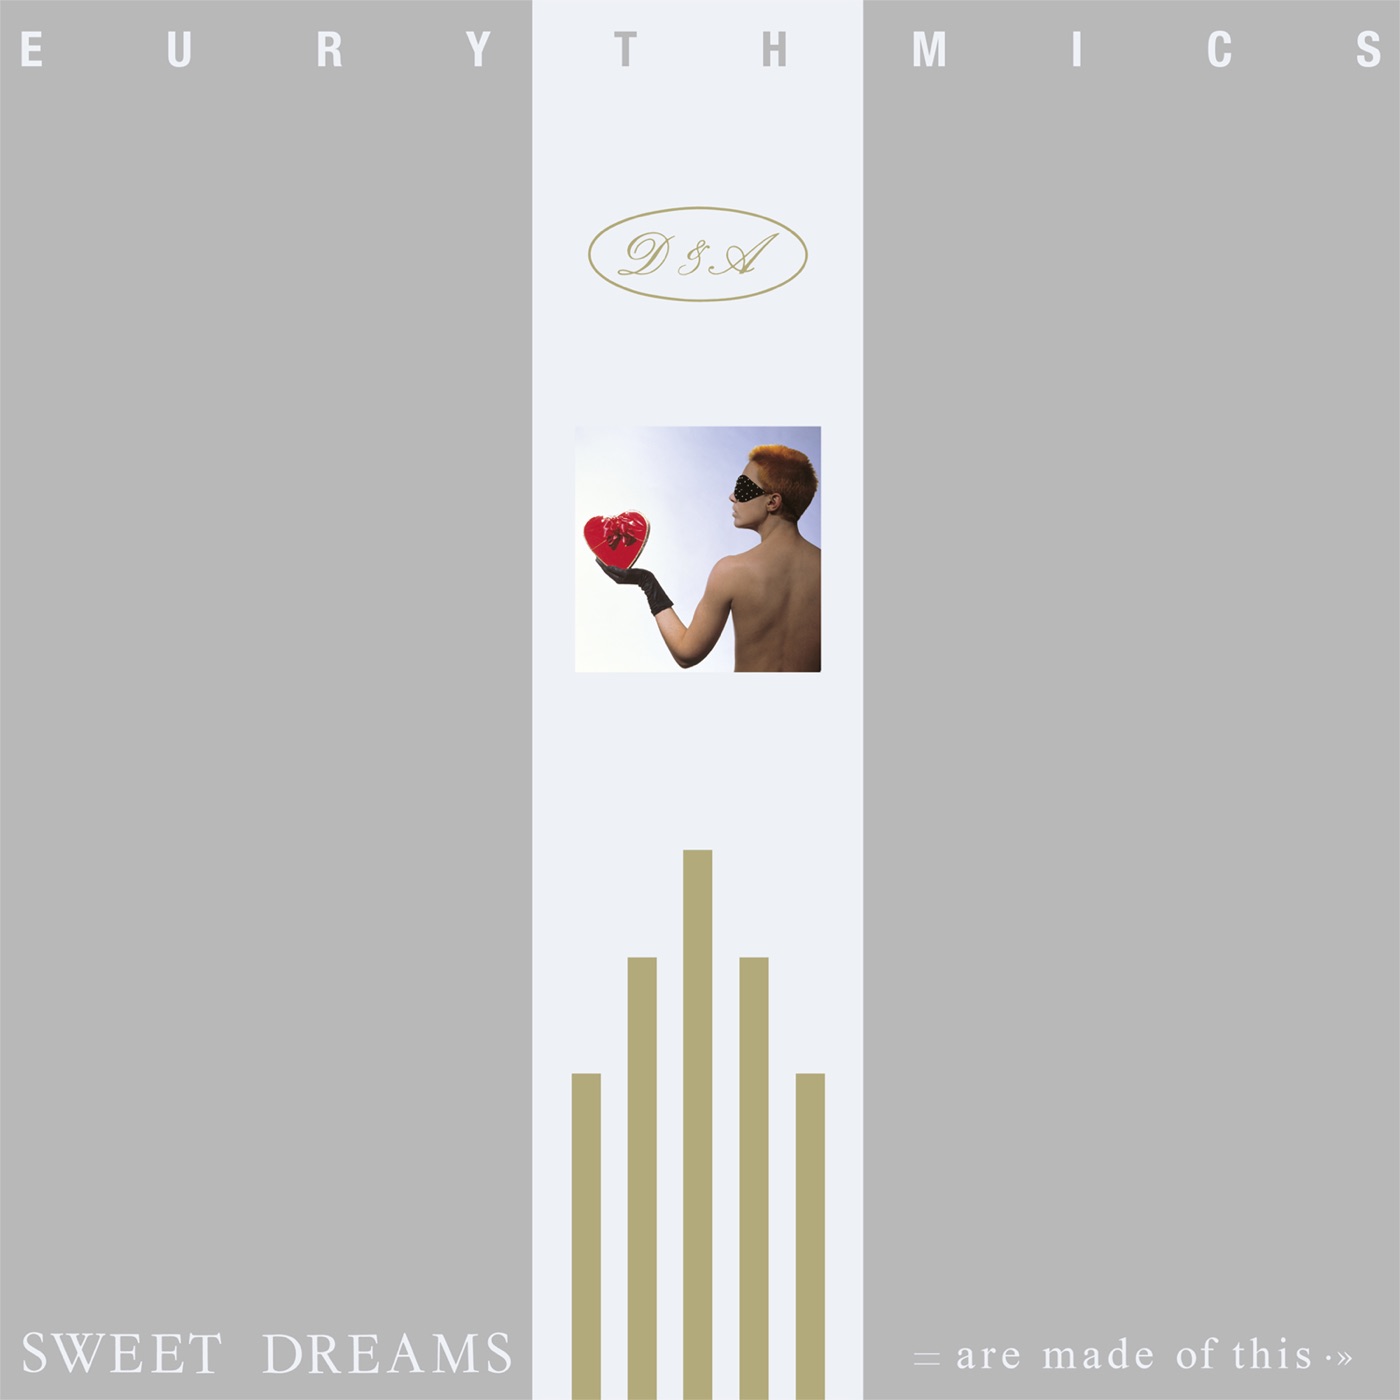 Sweet Dreams ((Are Made of This) [2018 Remastered]) by Eurythmics, Annie Lennox, Dave Stewart